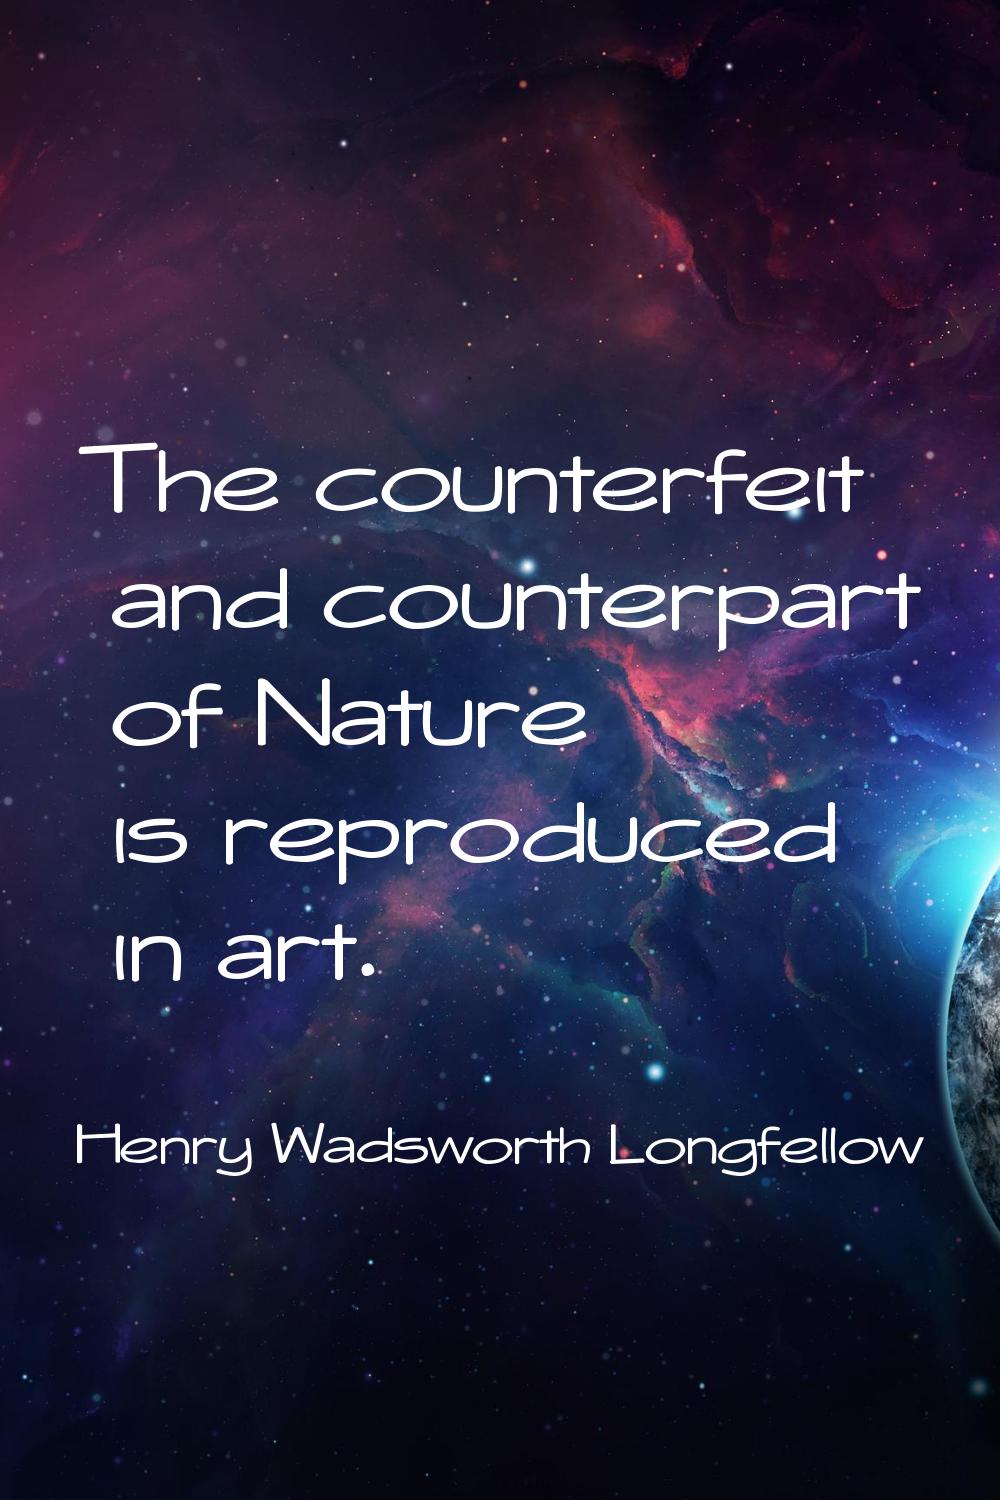 The counterfeit and counterpart of Nature is reproduced in art.